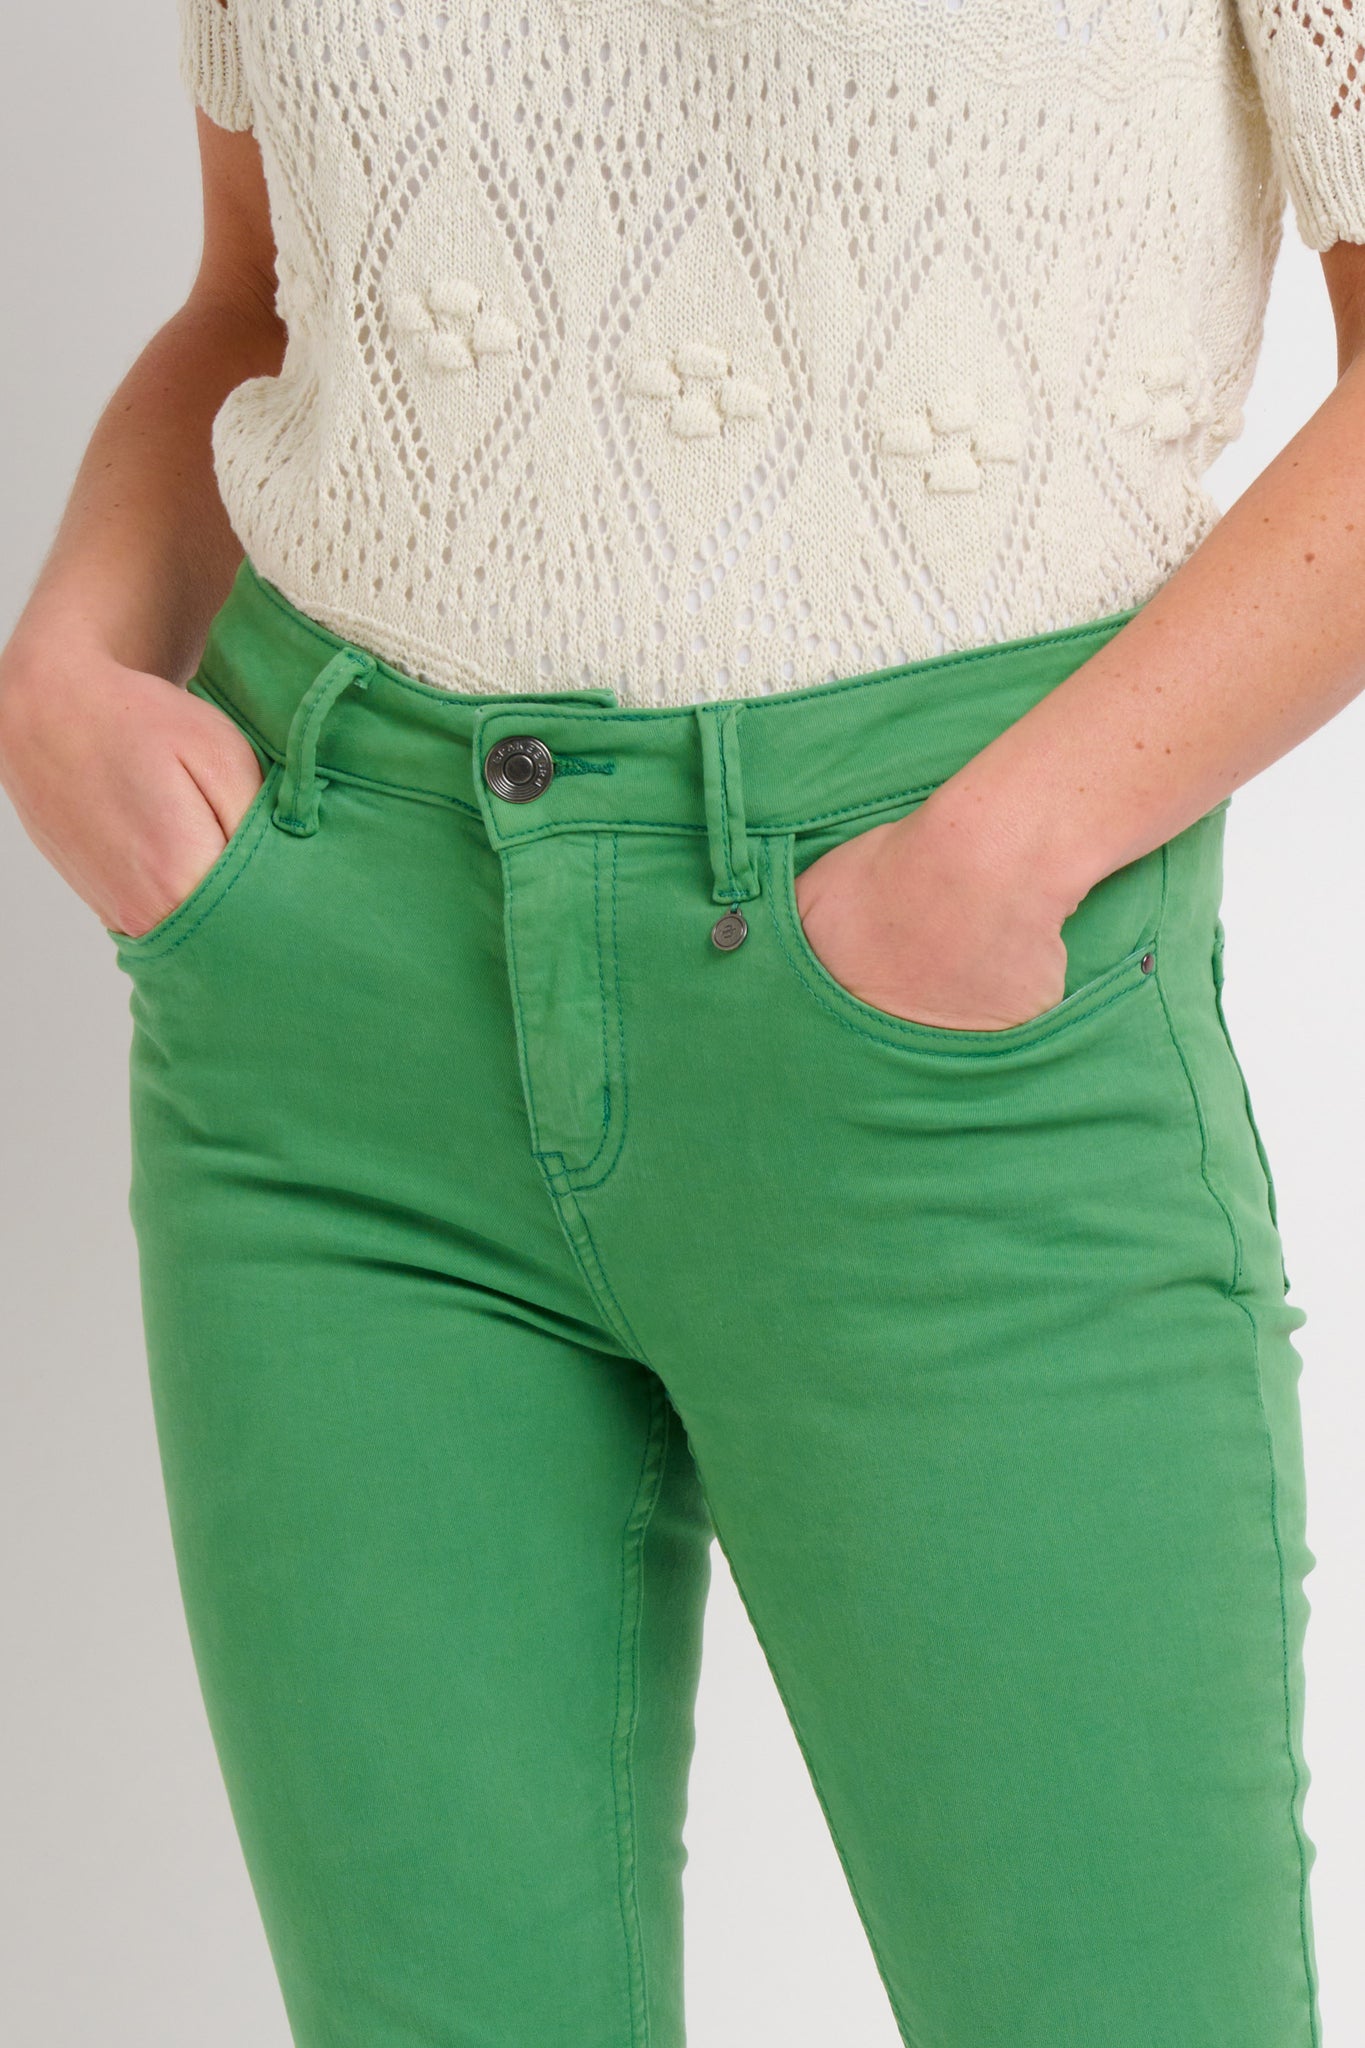 GREEN DIANTHUS JEANS